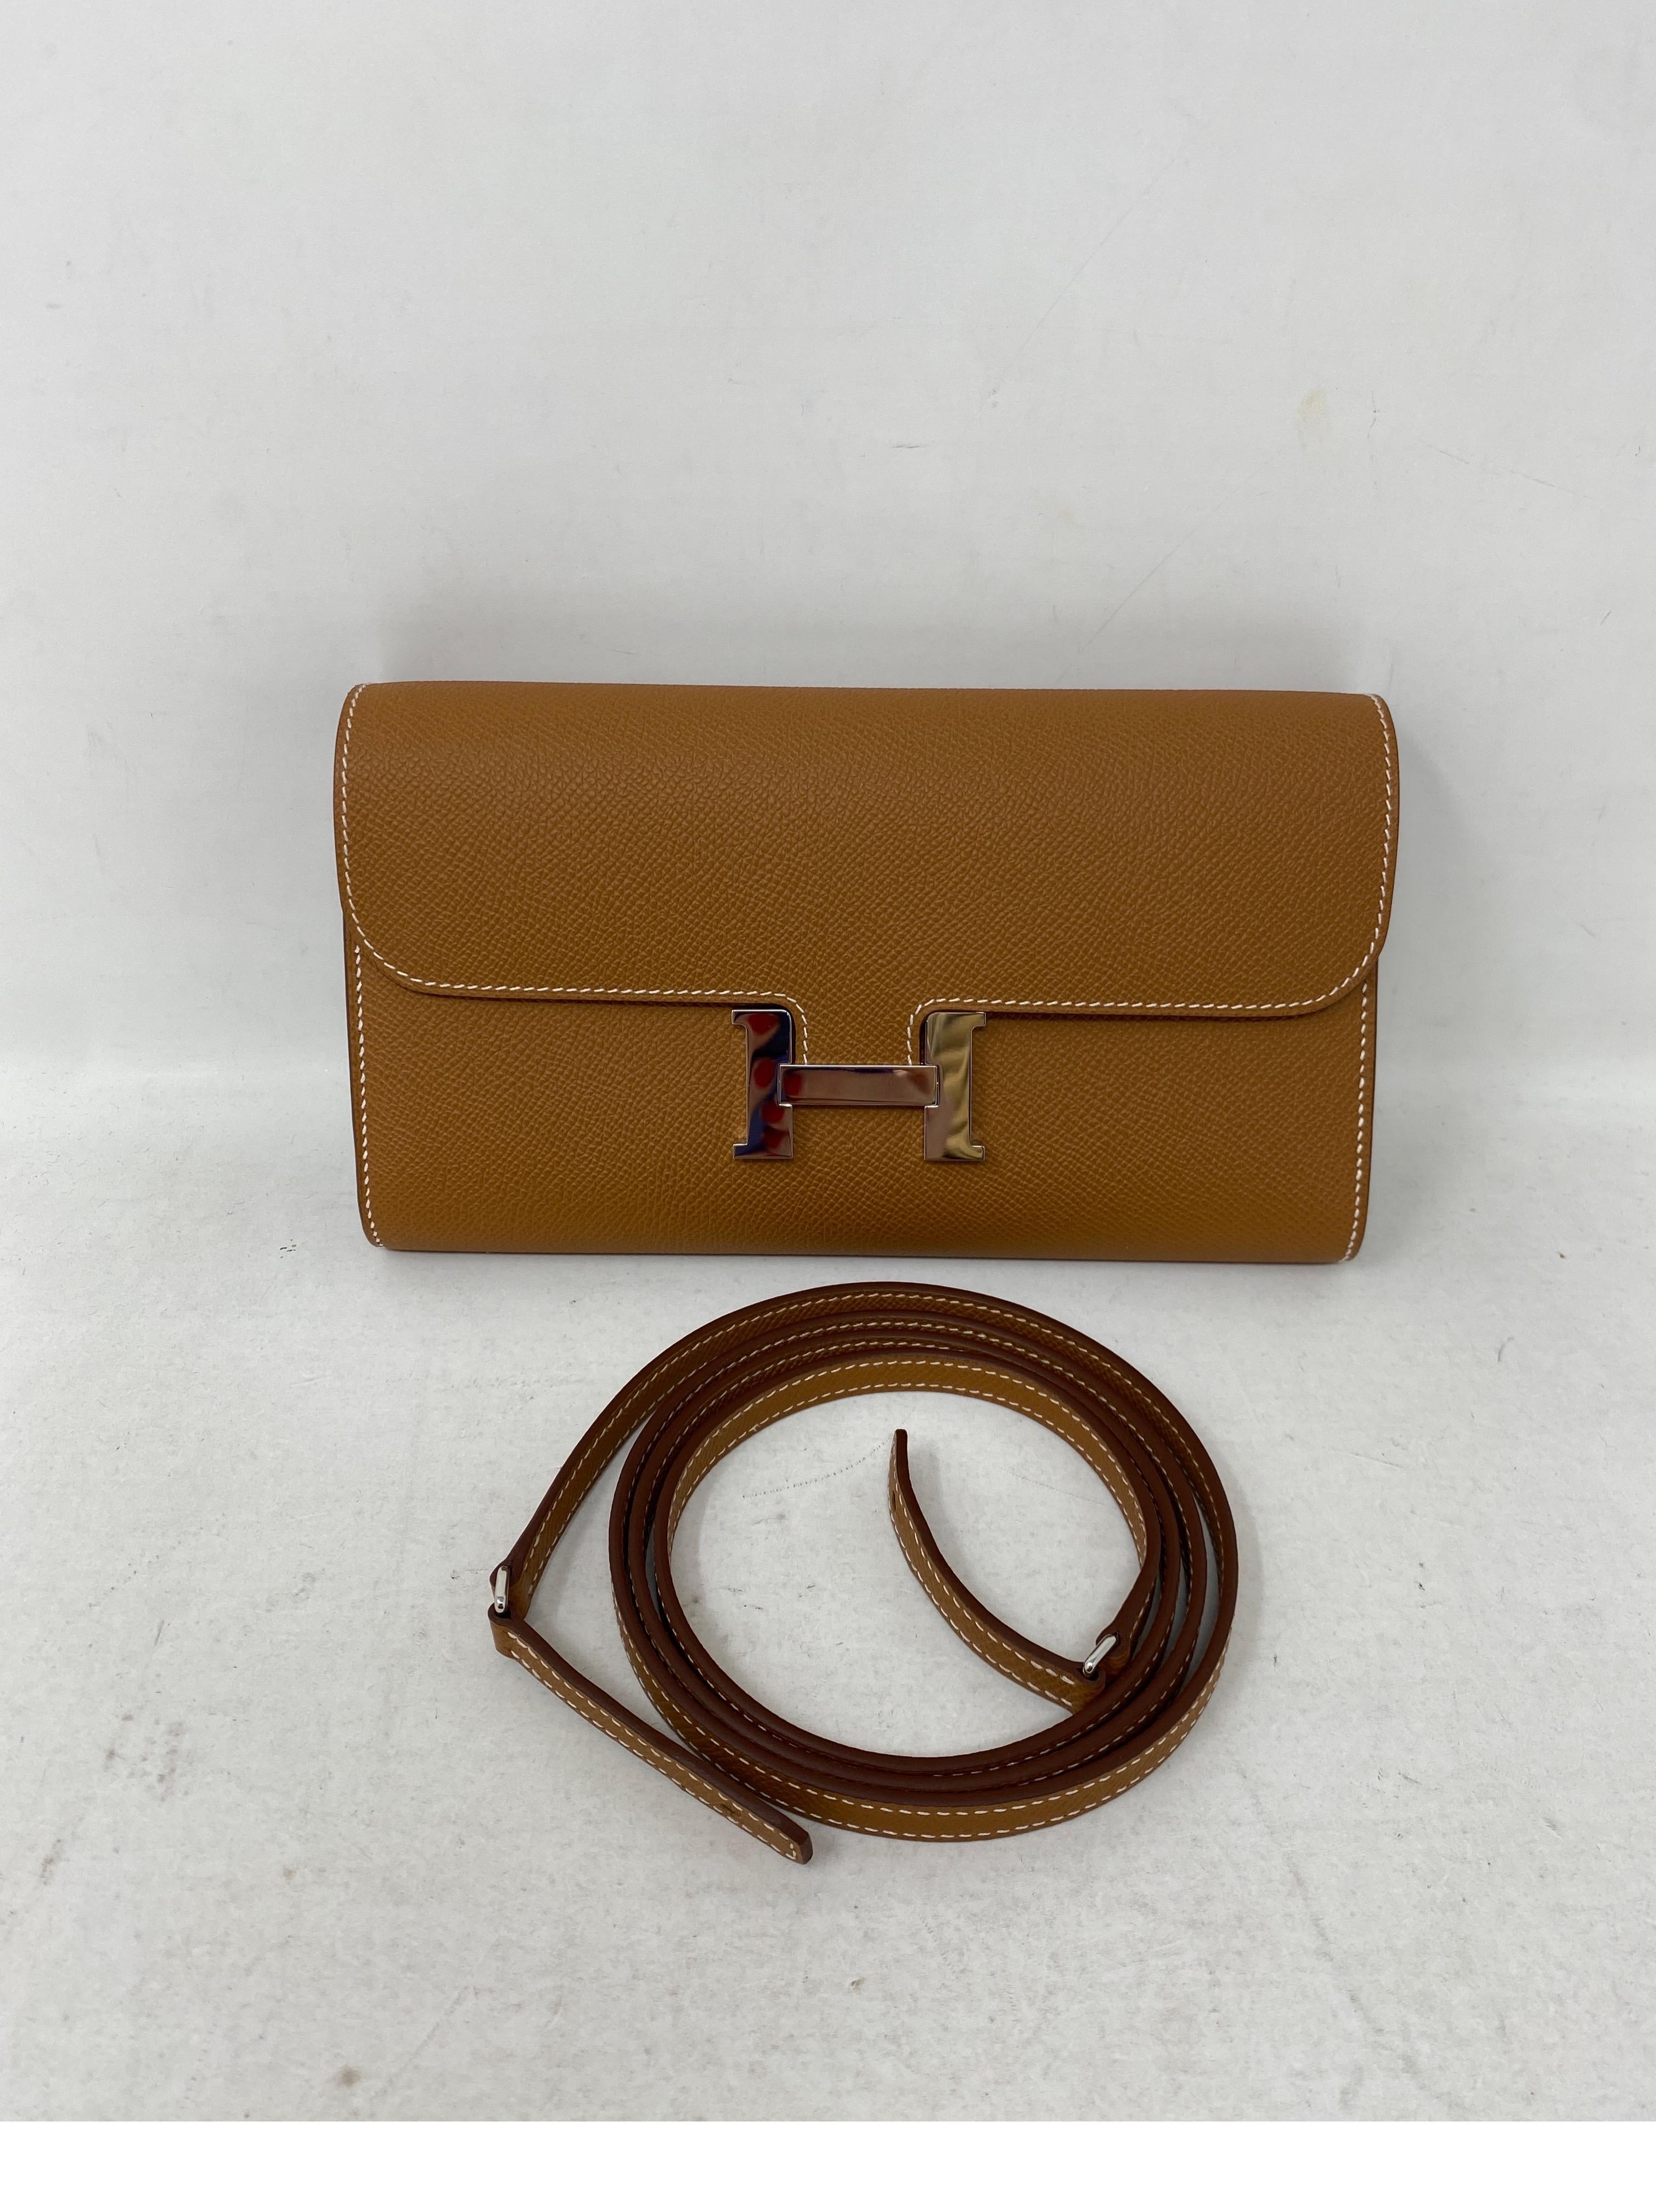 Hermes Gold Constance To Go Wallet Bag. Brand new and in box. Palladium silver hardware. Can be worn as a clutch or wallet. Also can be worn as a crossbody bag. Receipt included. Hard to get Hermes bag. Most wanted gold tan color by Hermes.